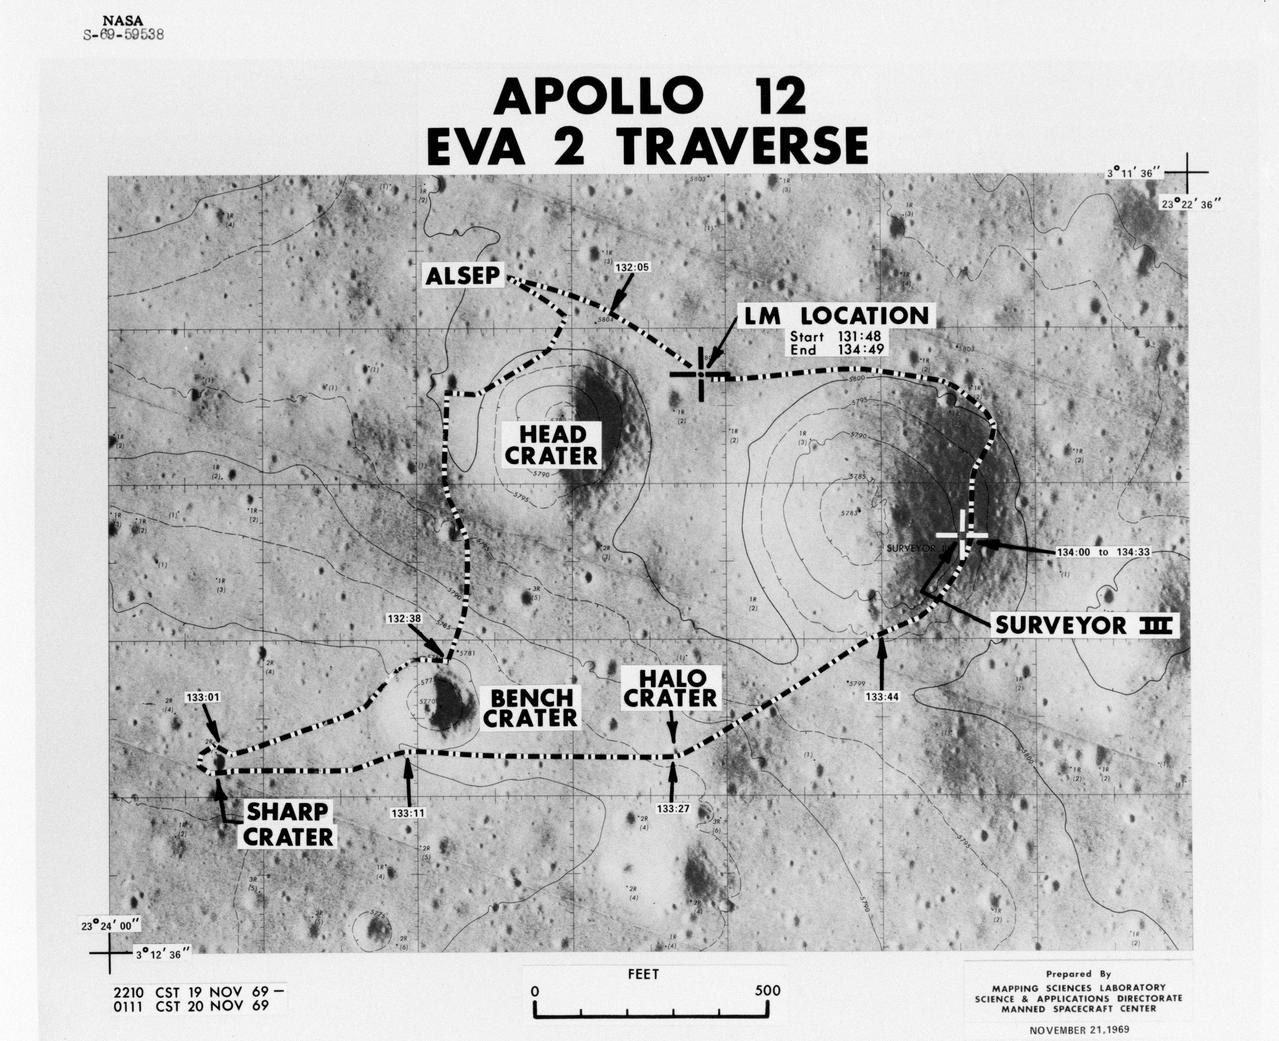 traverse map with paths and craters labeled 